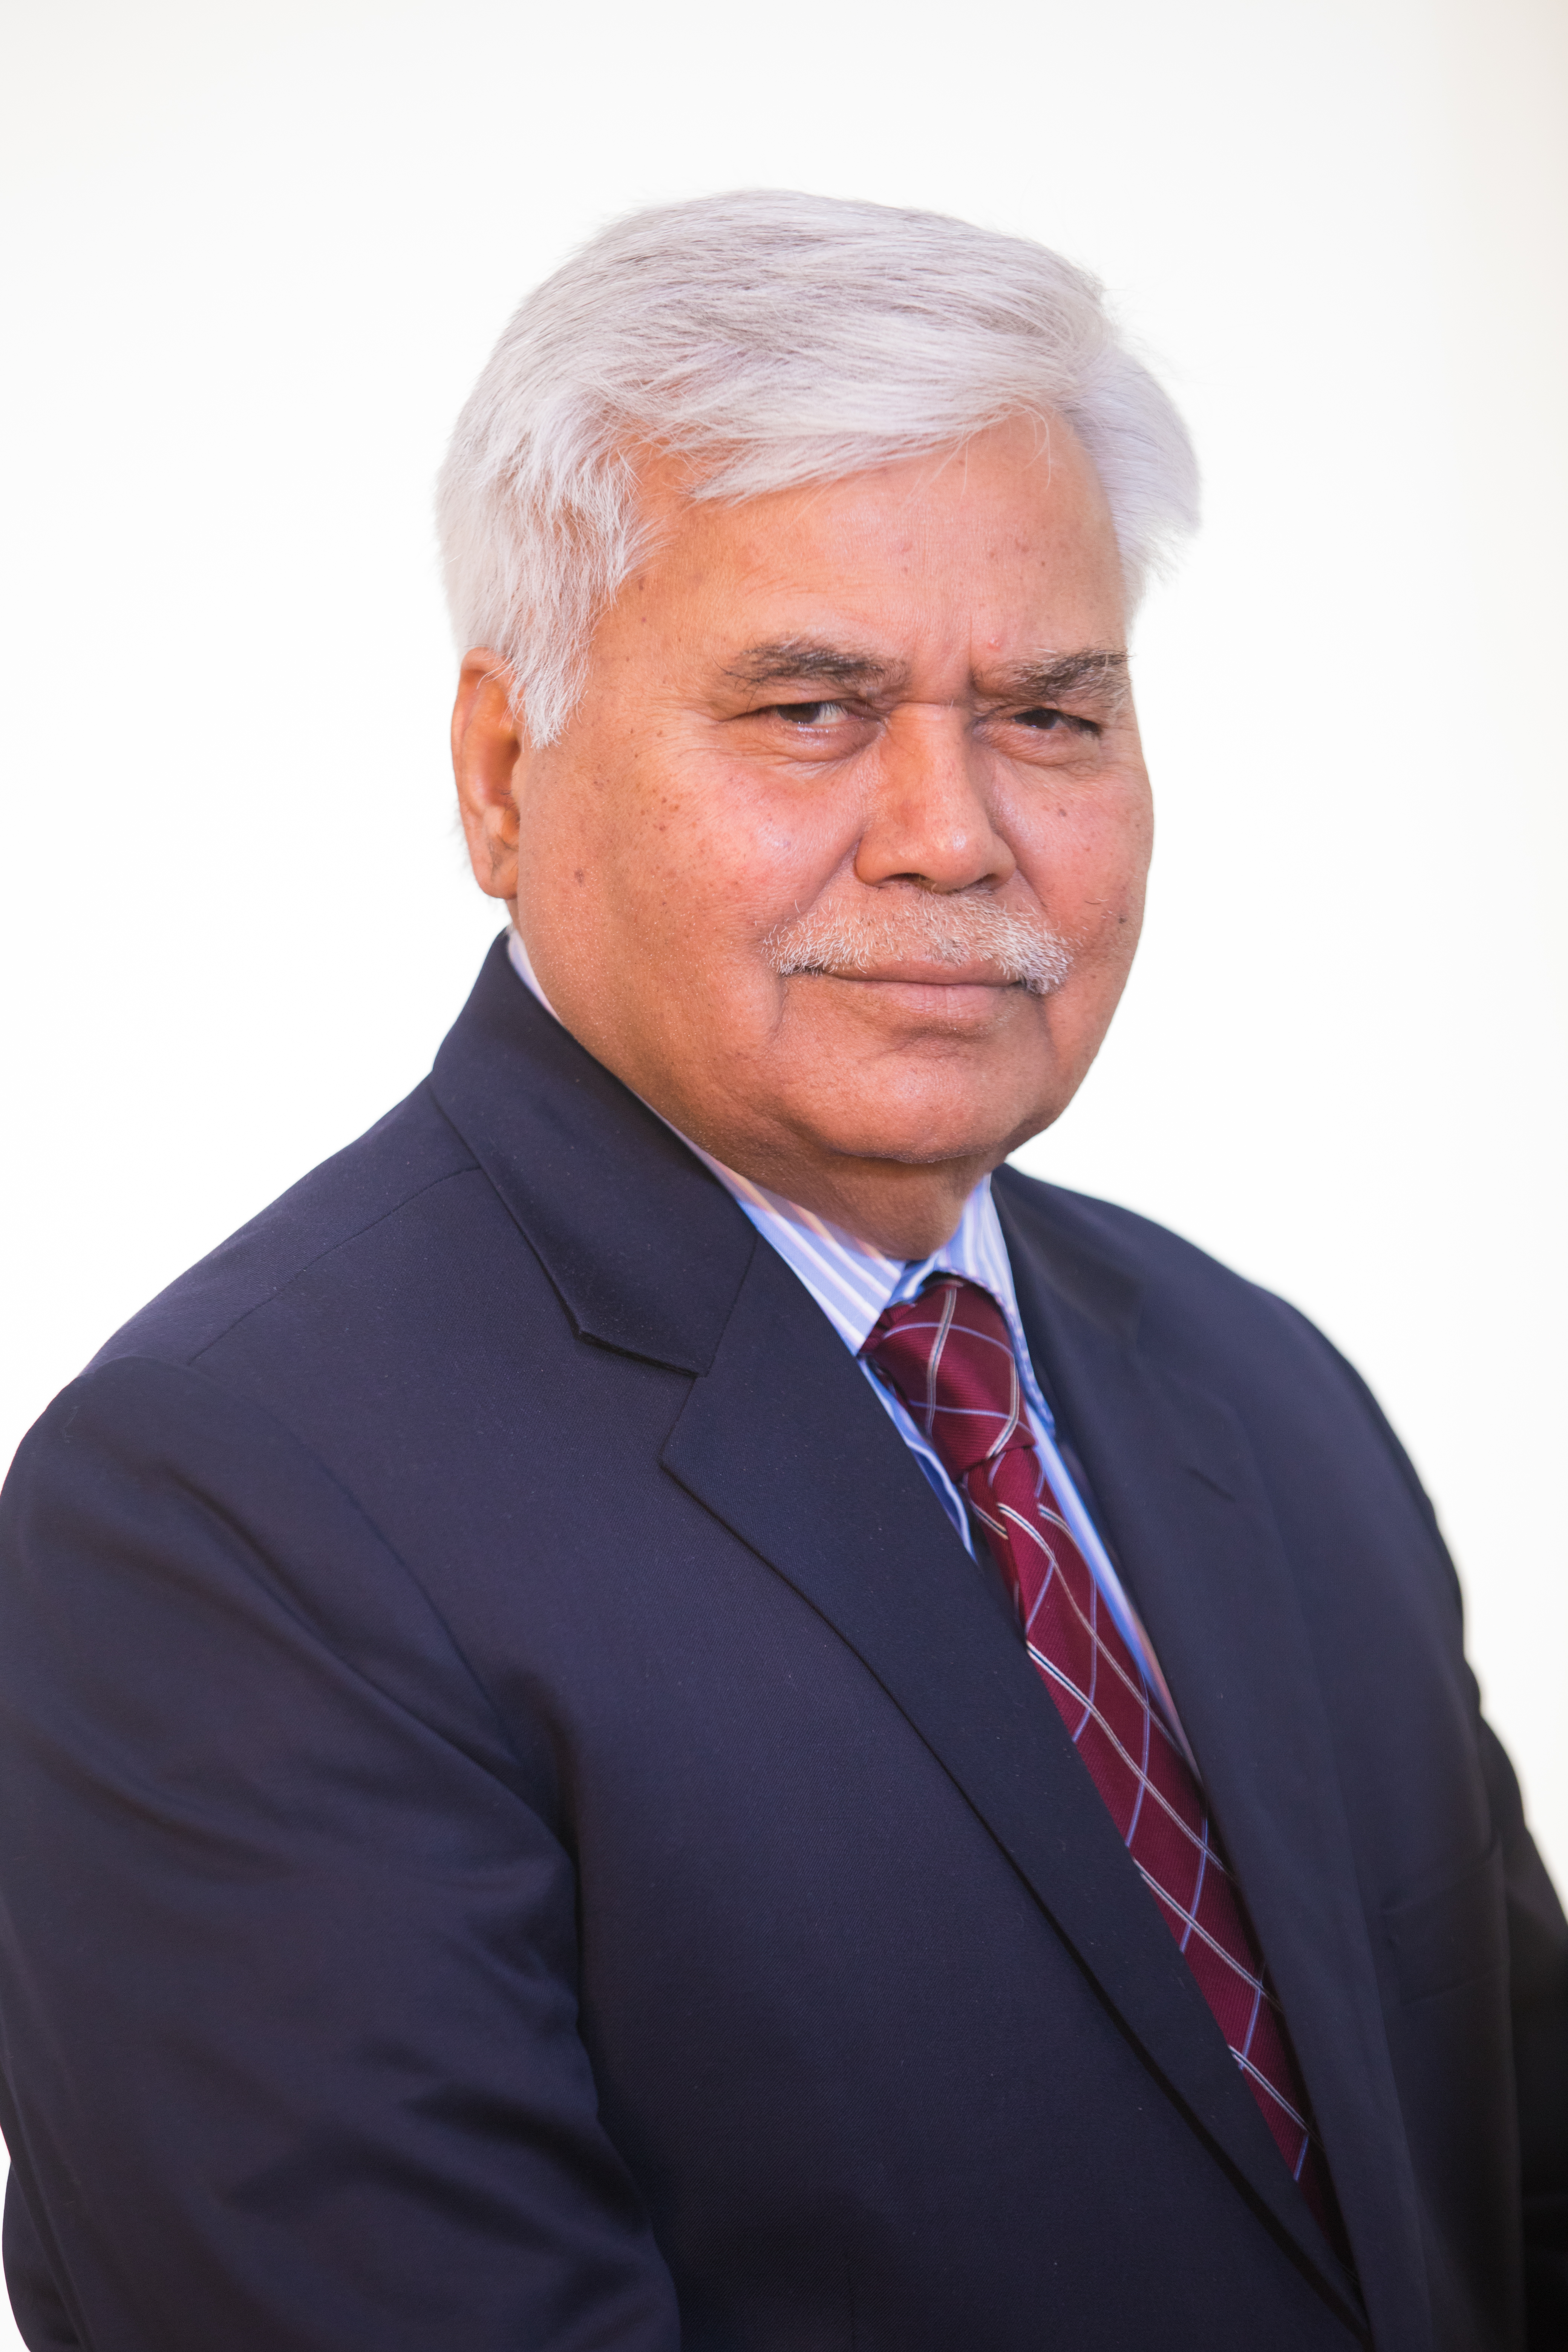 Dr. R S Sharma, <span>Chief Executive Officer, National Health Authority (NHA) Government of India</span>